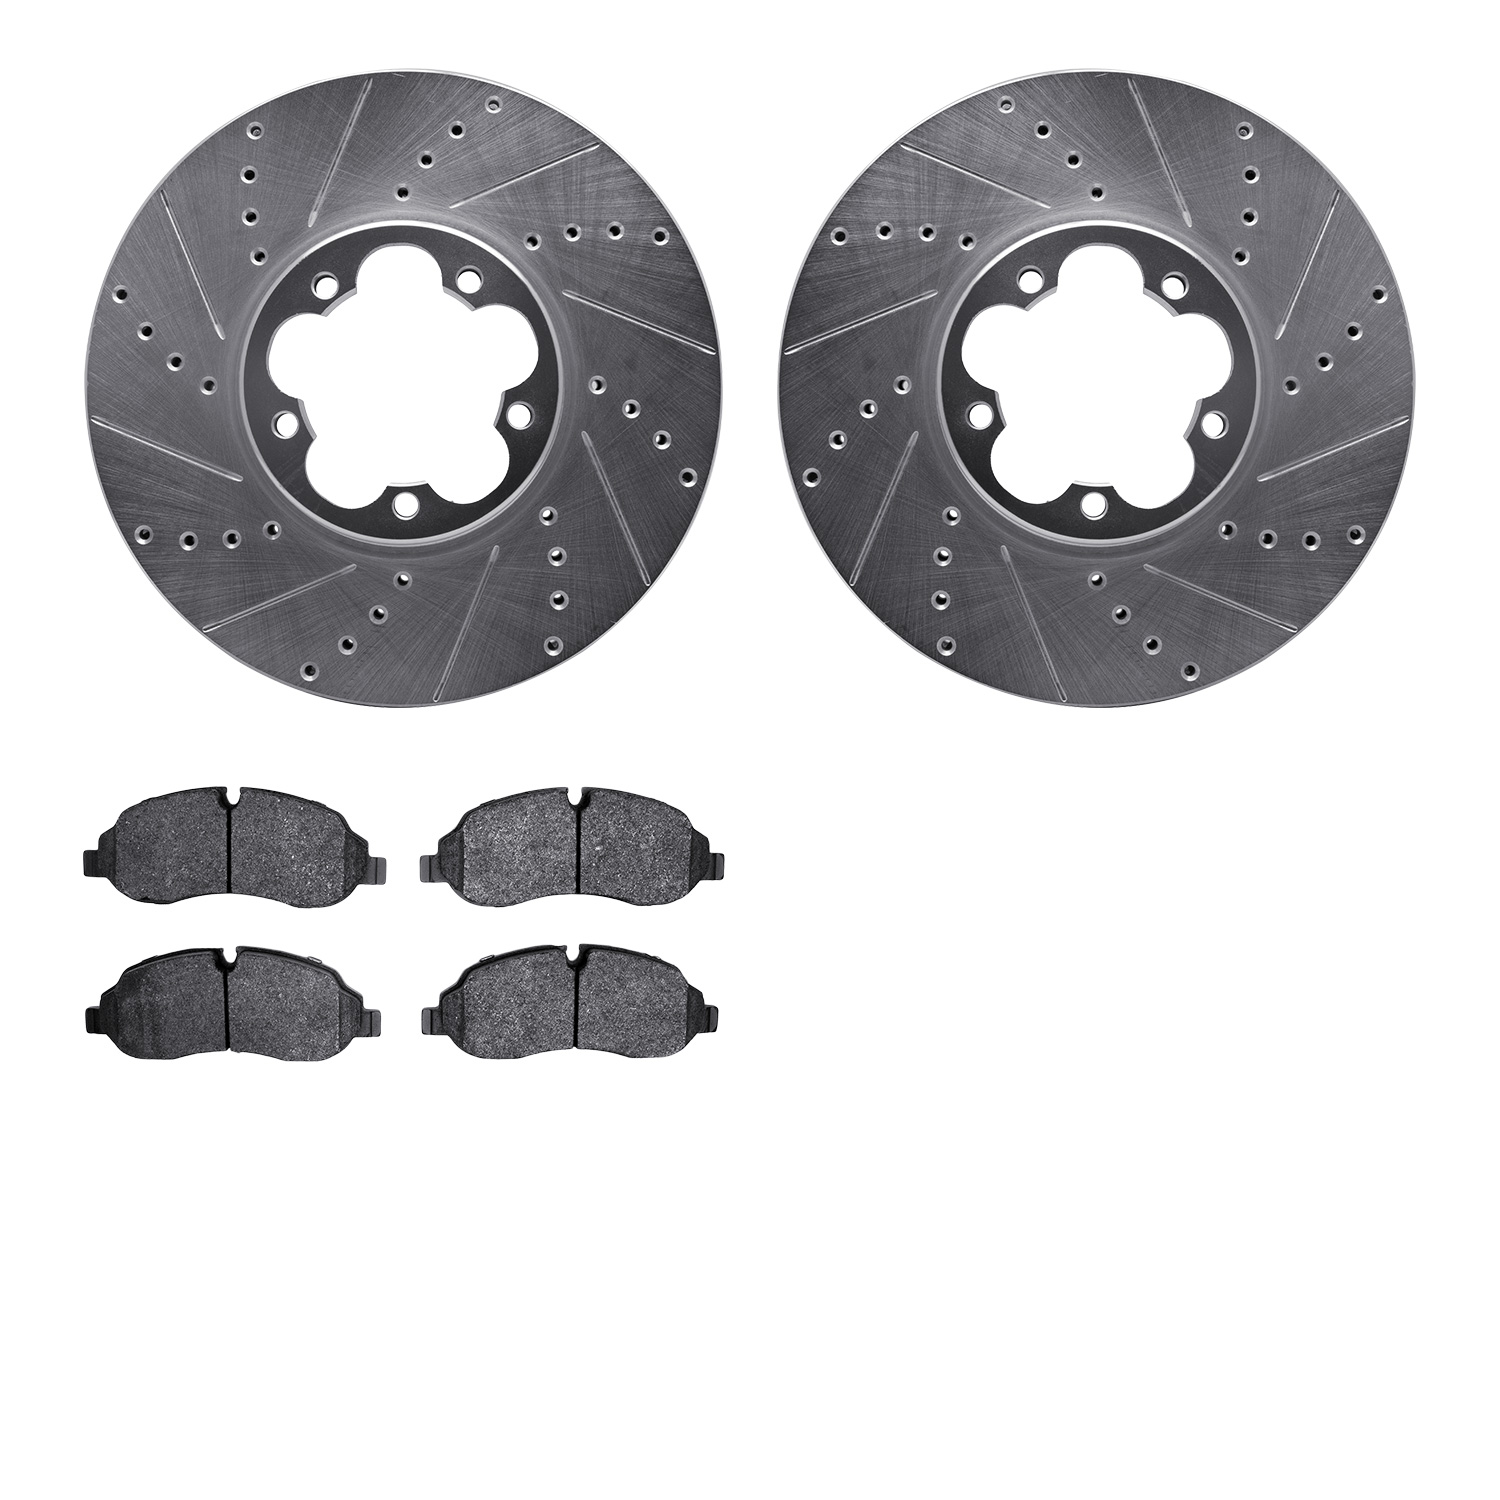 7502-99696 Drilled/Slotted Brake Rotors w/5000 Advanced Brake Pads Kit [Silver], Fits Select Ford/Lincoln/Mercury/Mazda, Positio